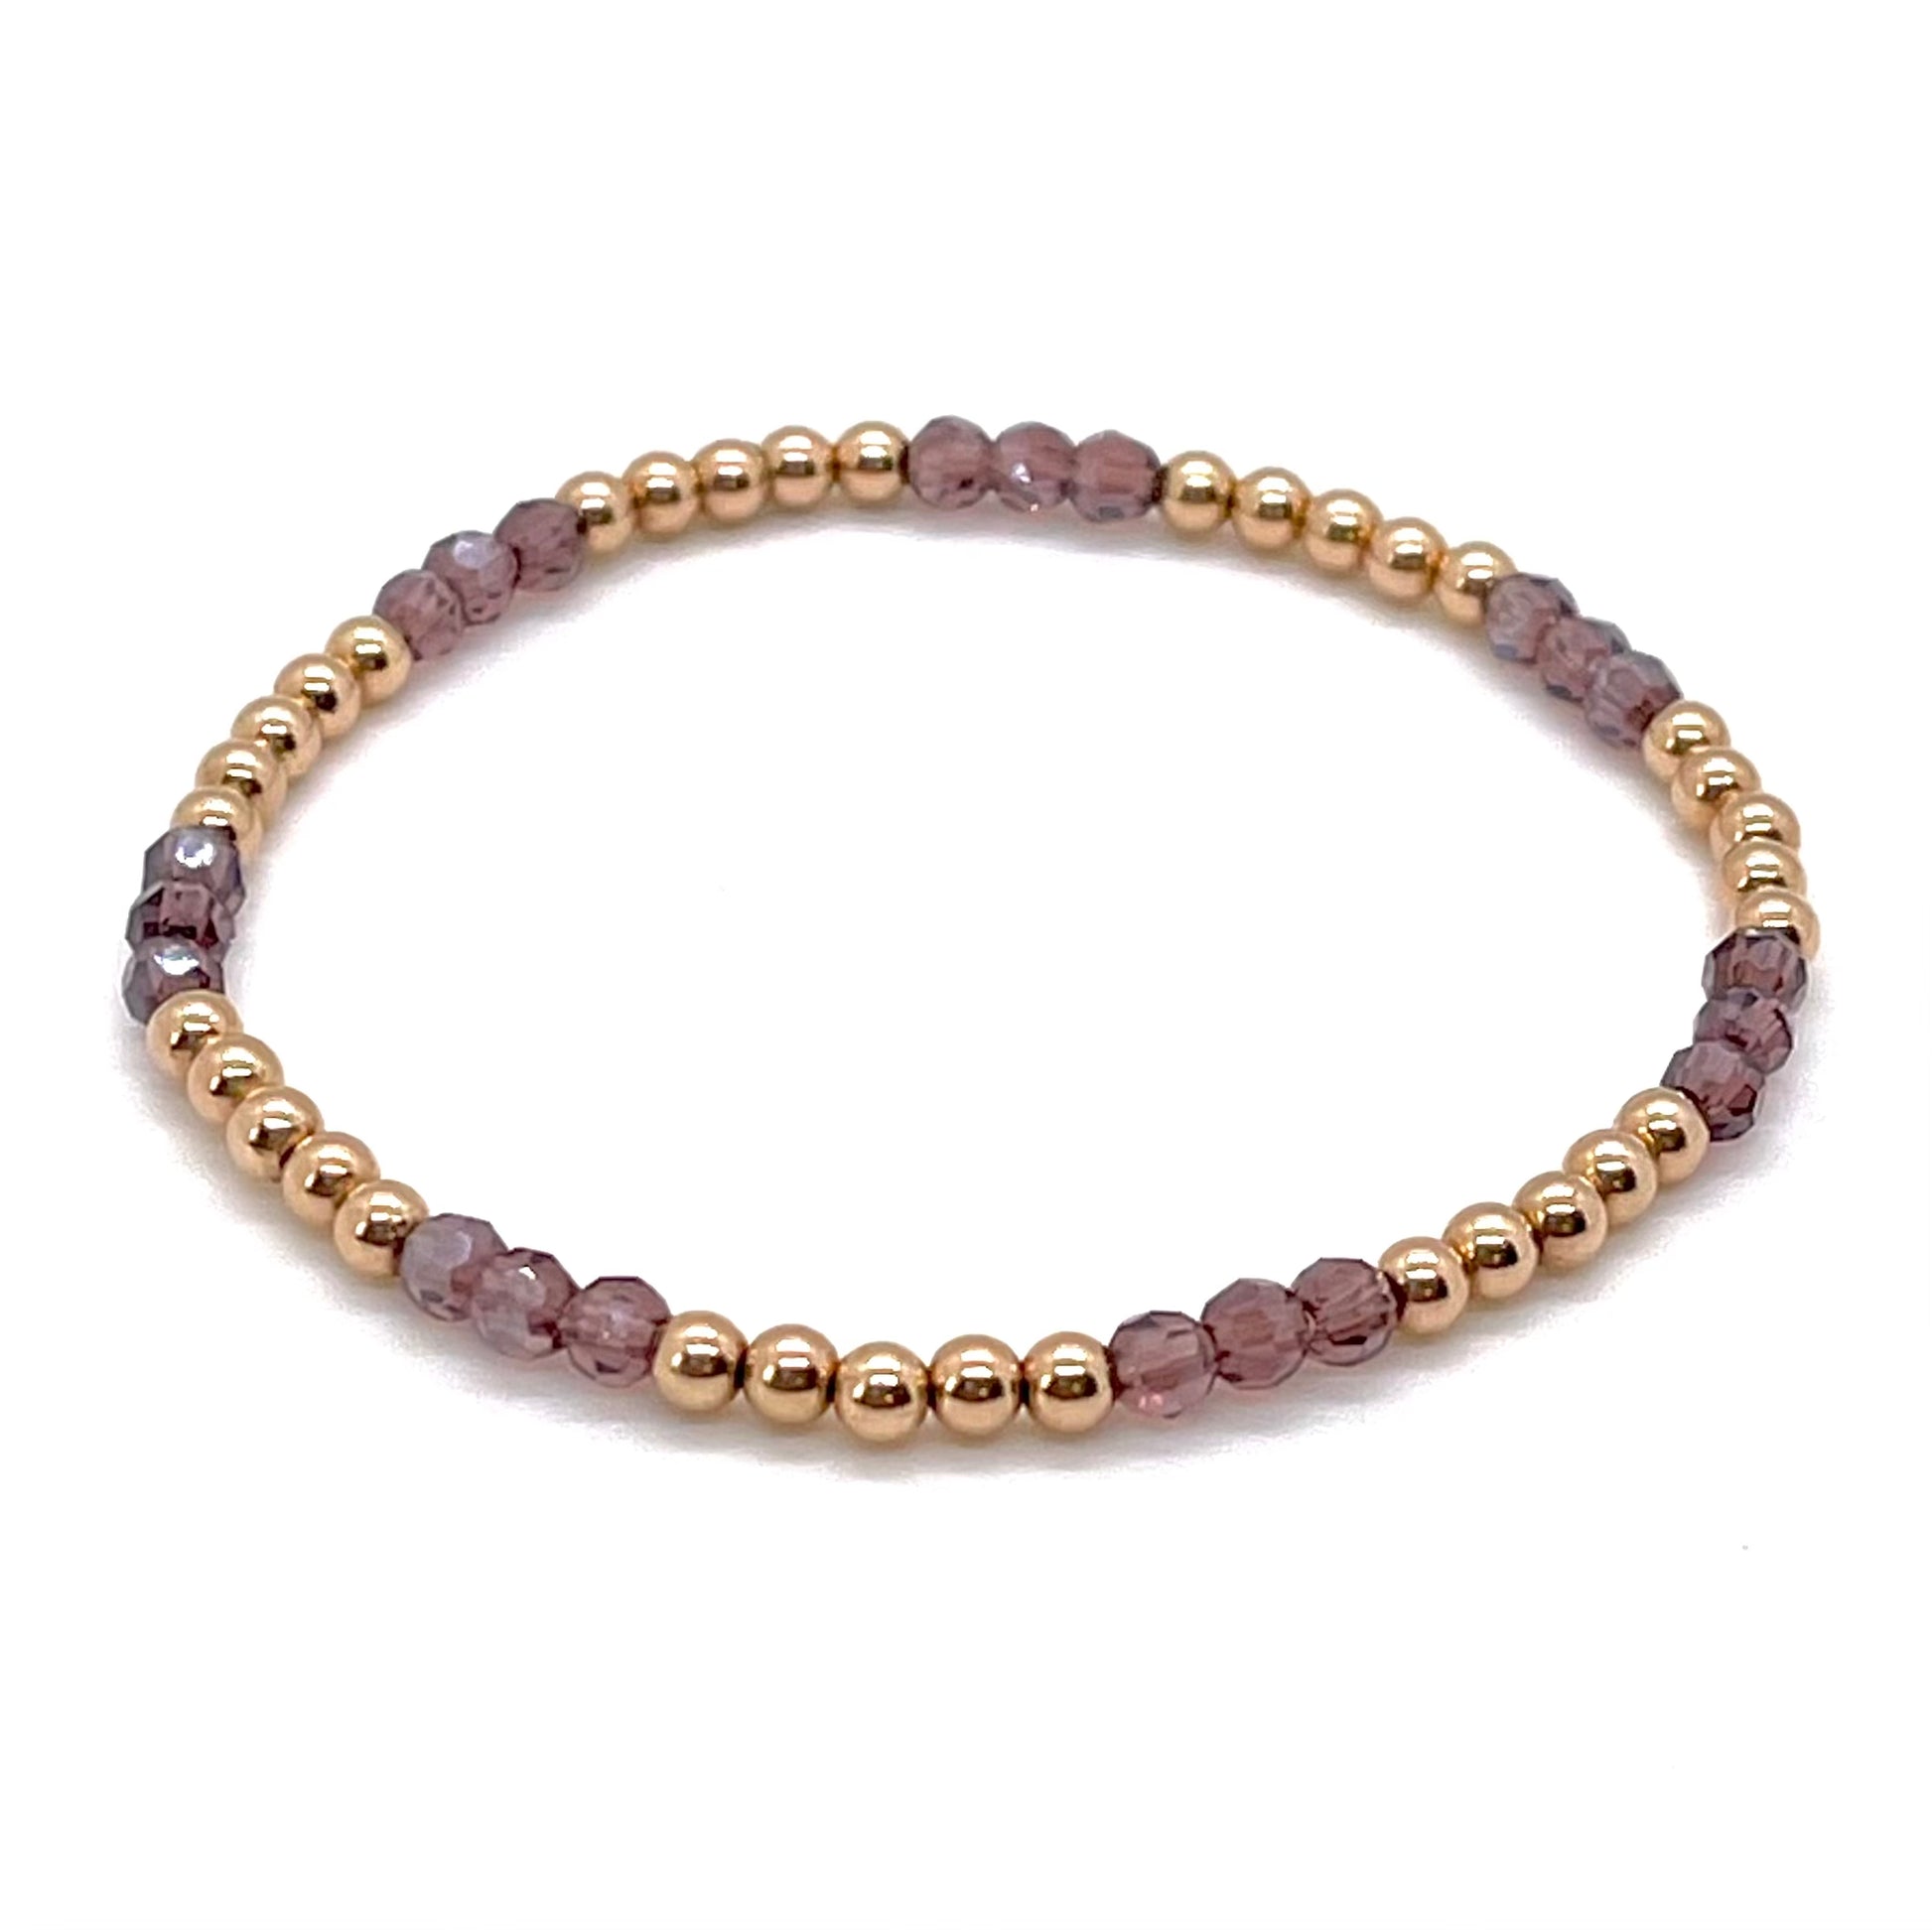 Rose gold bracelet for women with amethyst faceted glass beads and 14K rose gold filled 3mm balls on elastic stretch.